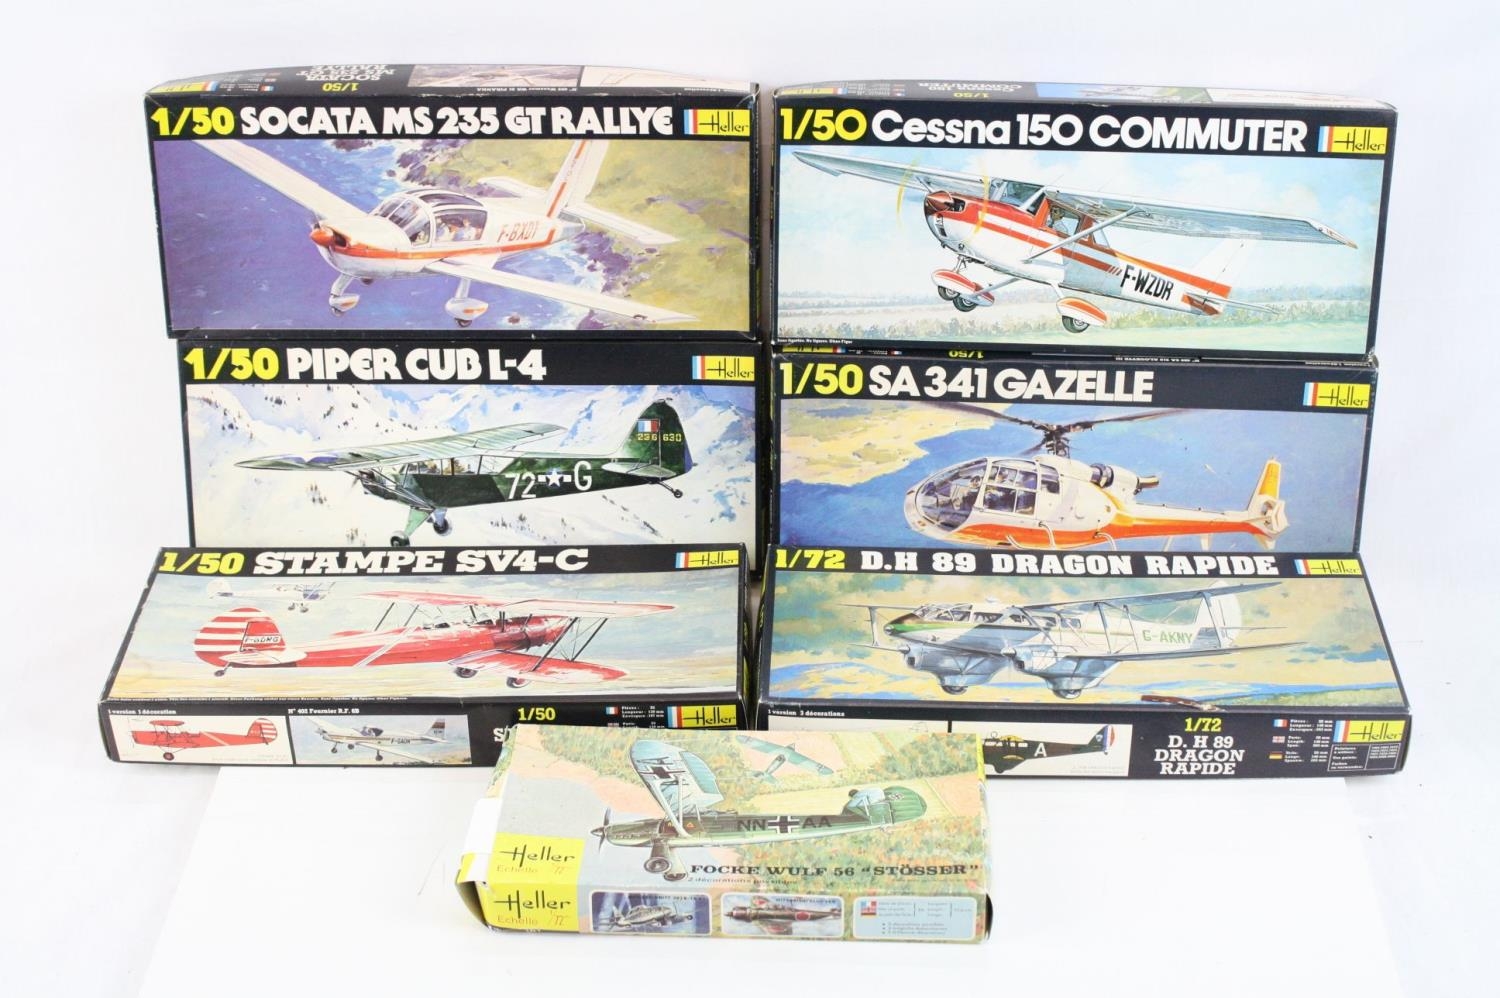 Five Boxed 1 50 Scale Heller Plastic Model Kits To Include Socata Ms 235 Gt Rallye Stampe Sv4 C Ce